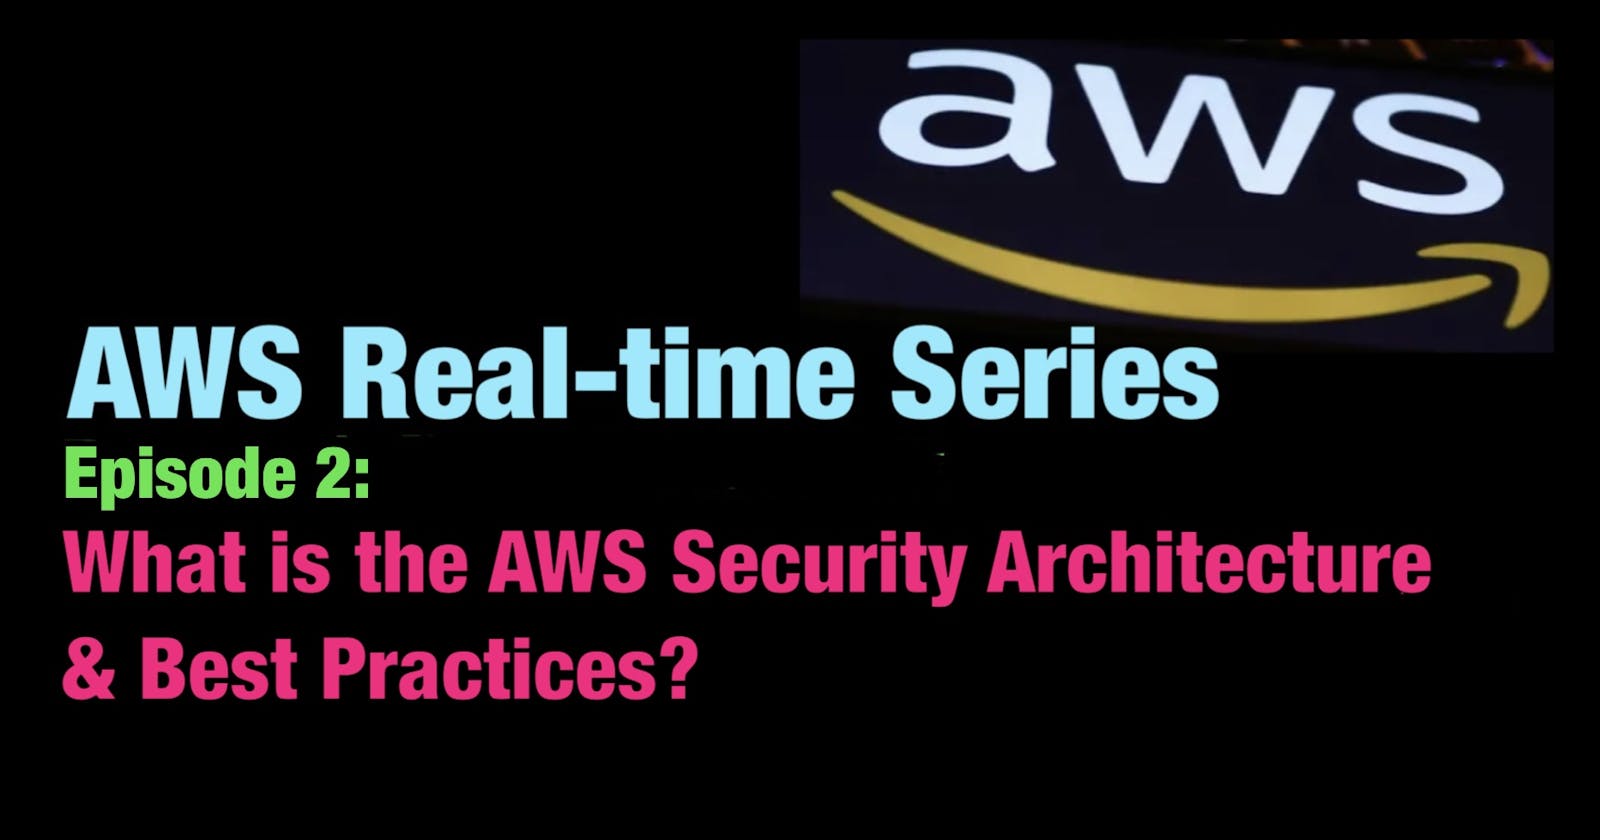 What is the AWS Security Architecture & Best Practices?